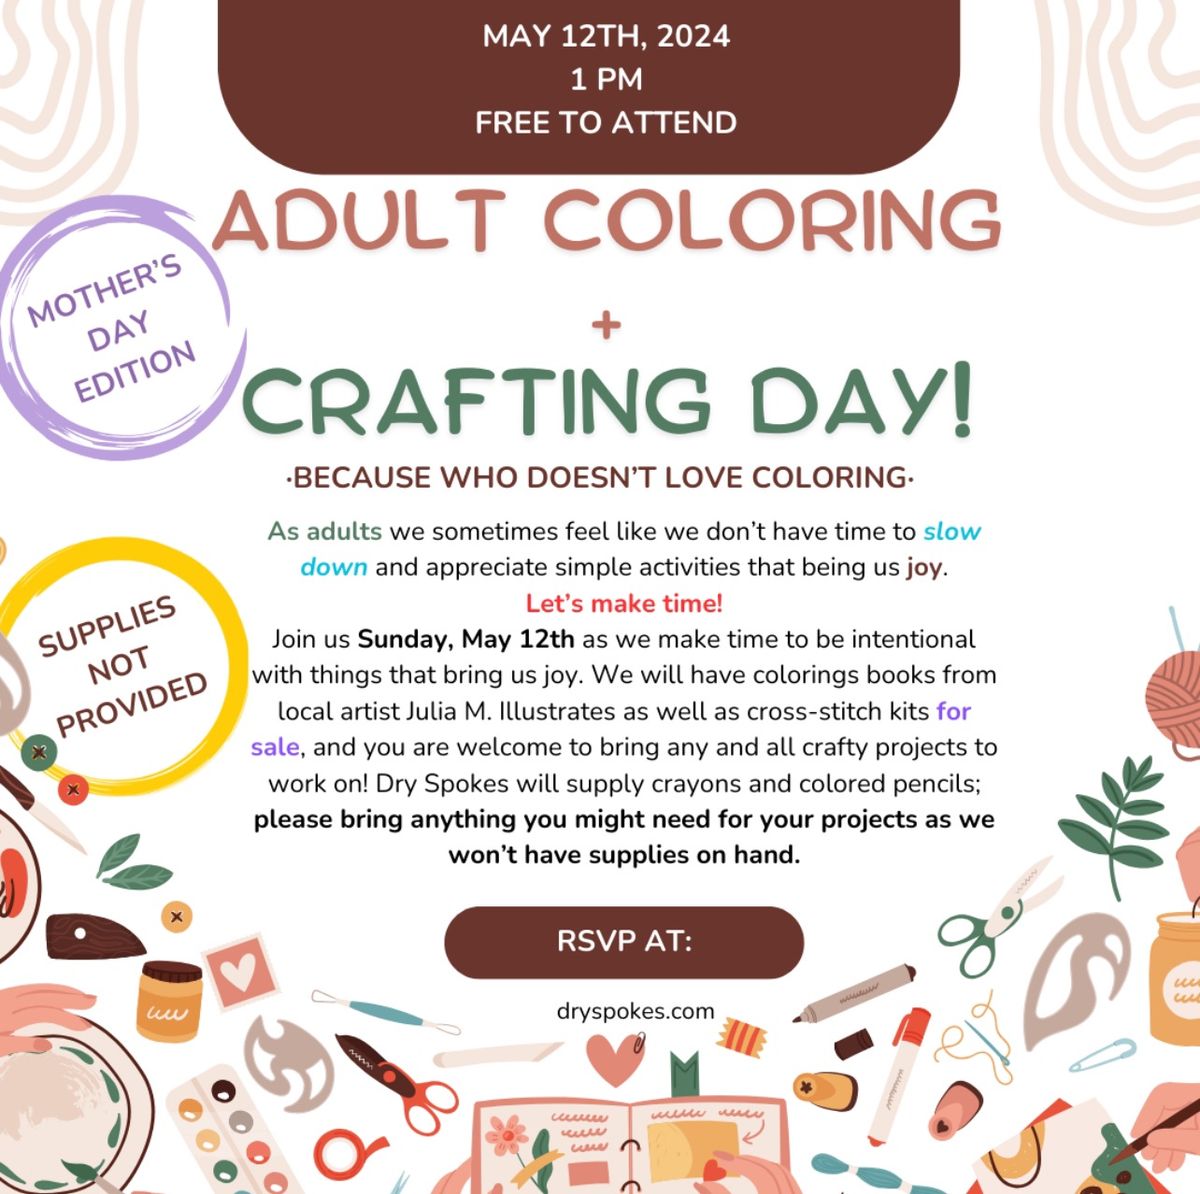 Adult Coloring + Crafting Day: Mother\u2019s Day Edition 